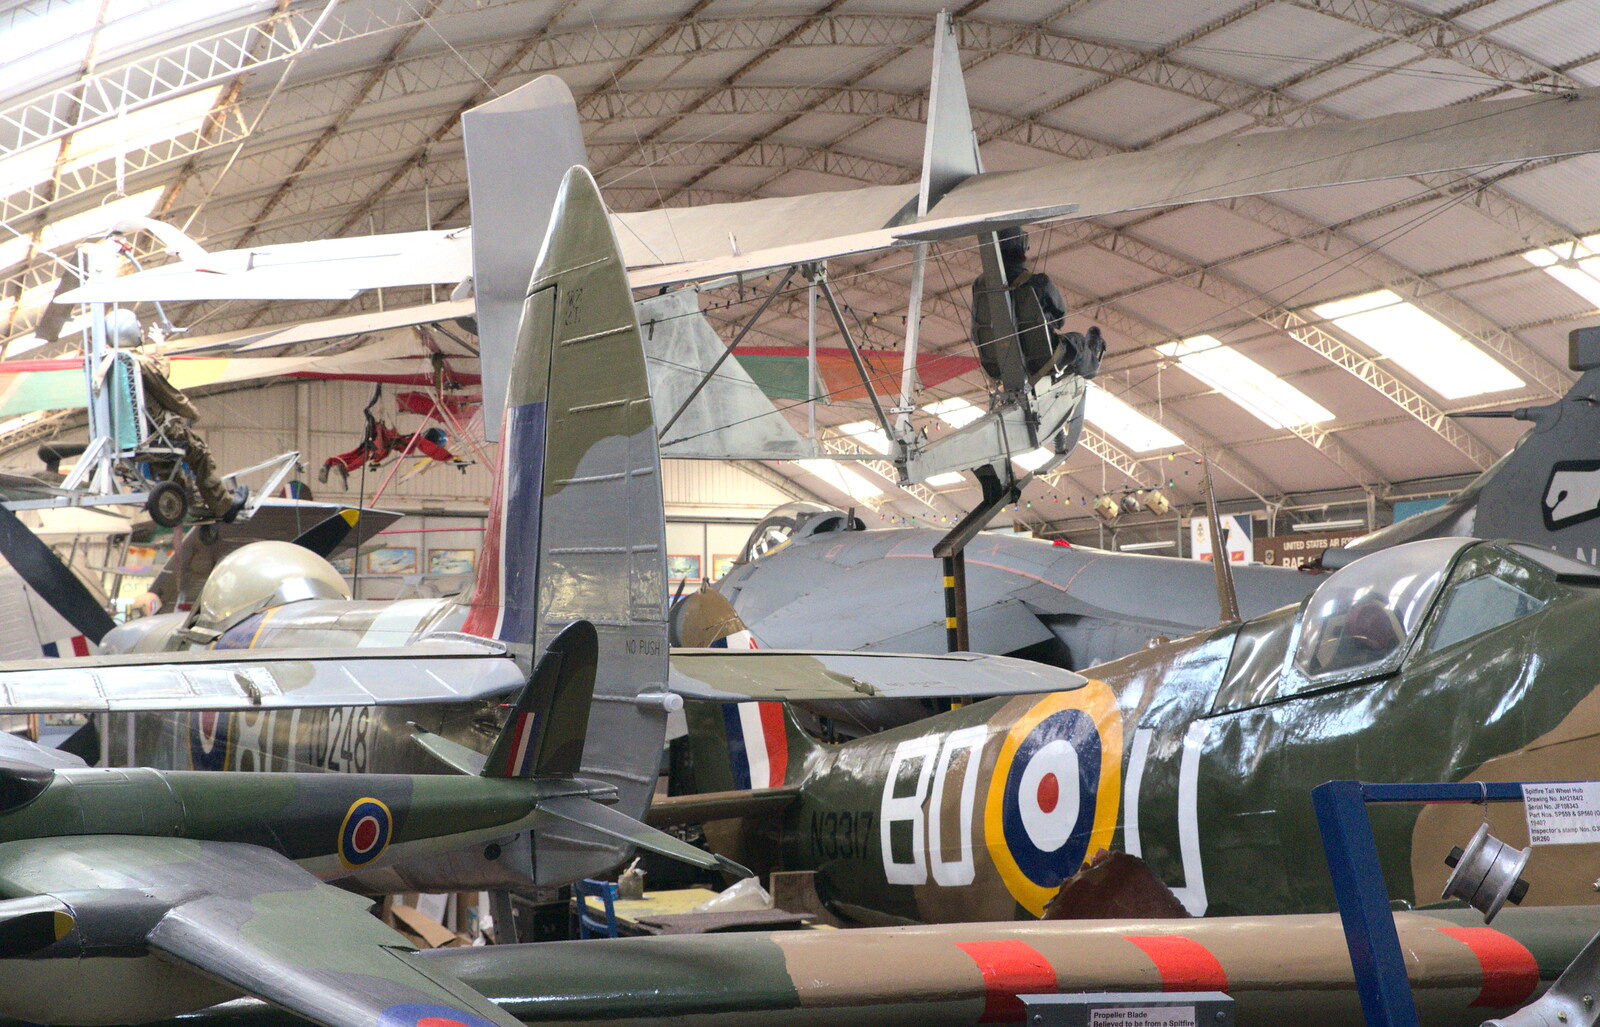 A jumble of planes, crammed in together from Norfolk and Suffolk Aviation Museum, Flixton, Suffolk - 30th April 2017